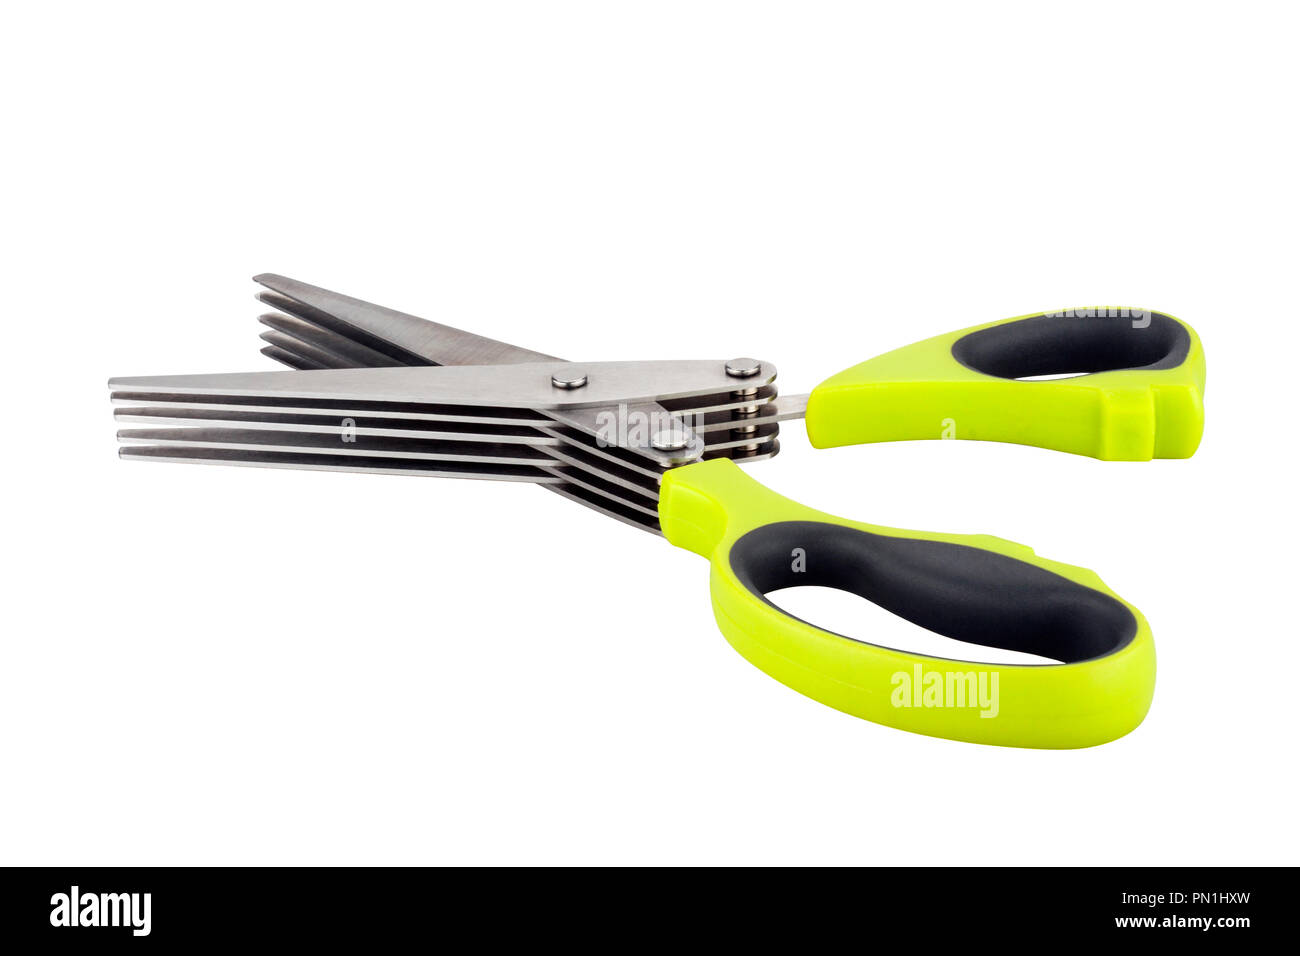 https://c8.alamy.com/comp/PN1HXW/herb-scissors-with-comb-isolated-on-white-background-PN1HXW.jpg